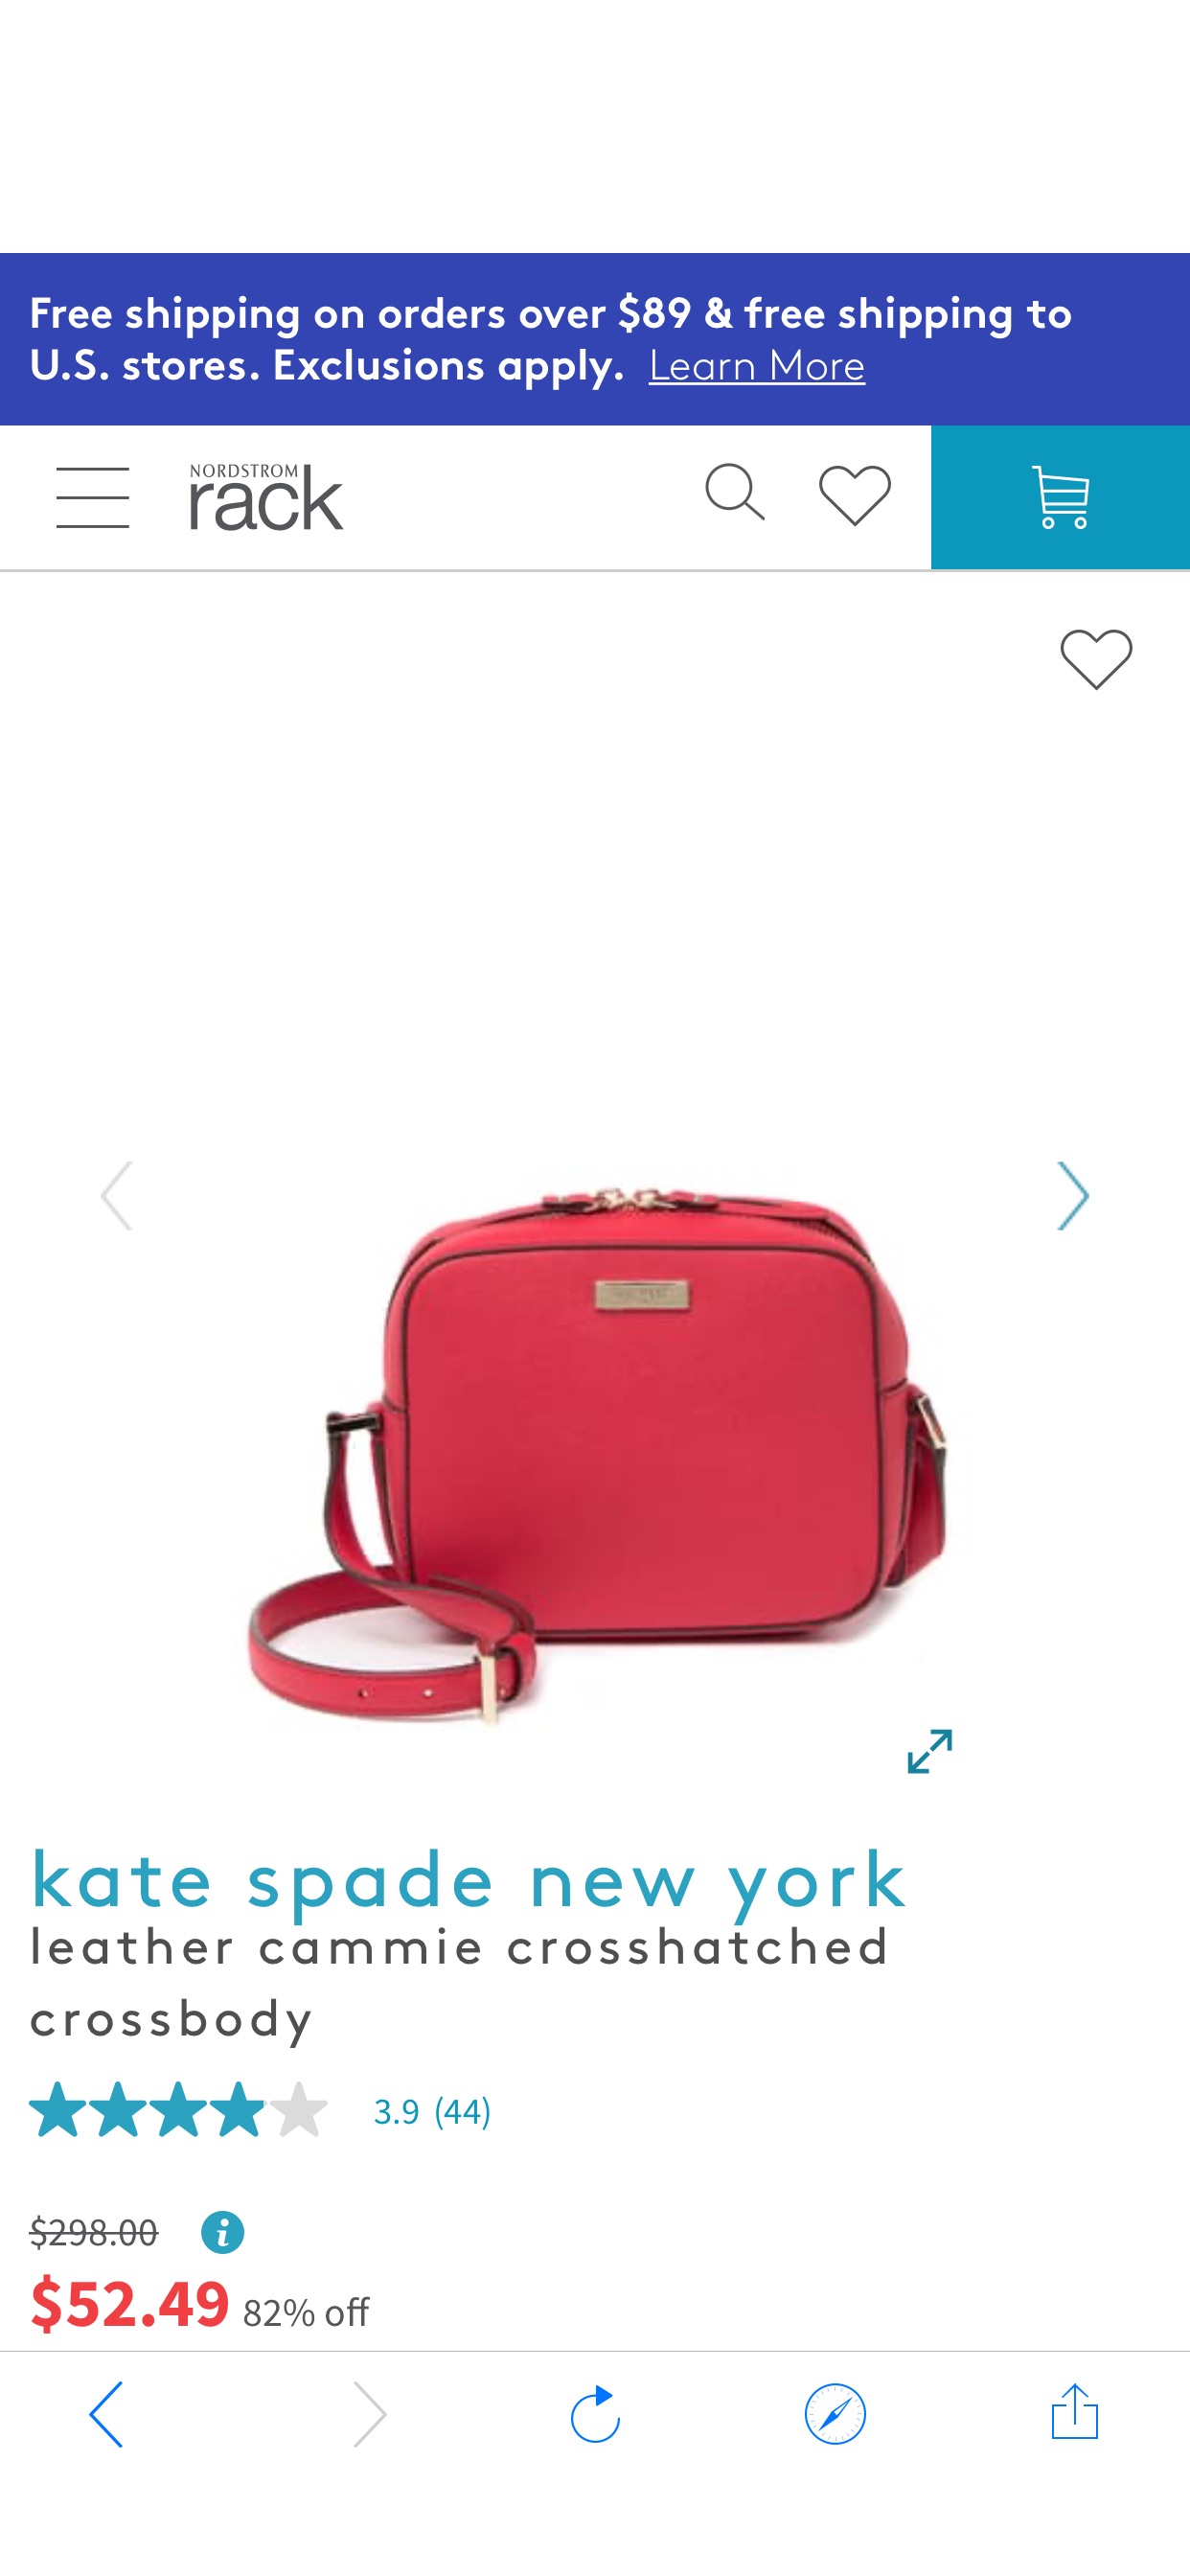 kate spade new york | leather cammie crosshatched crossbody | Nordstrom Rack
斜挎包